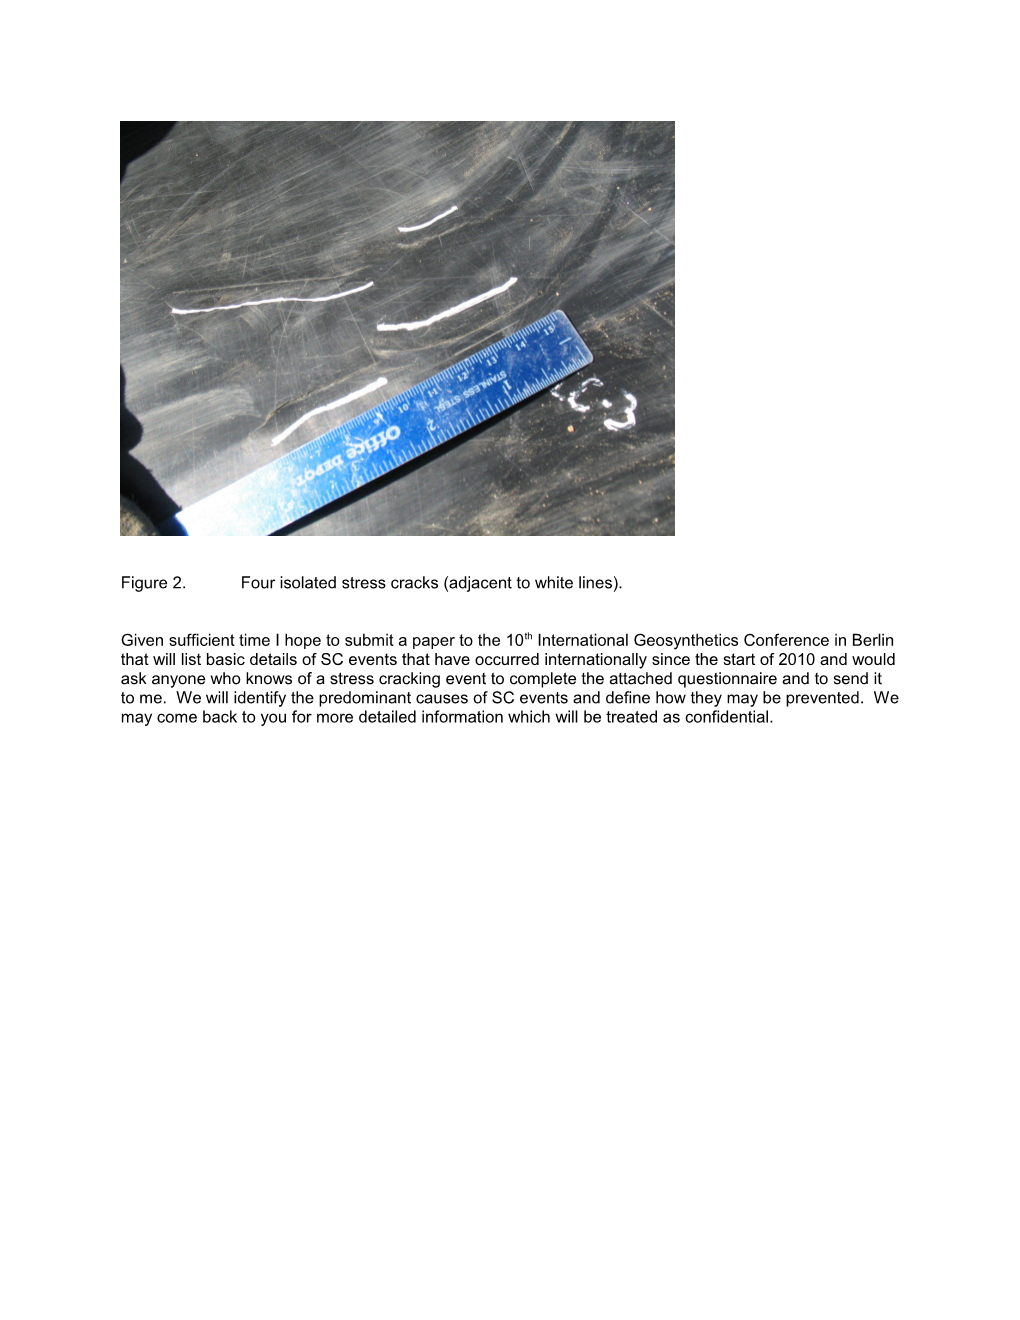 Eliminating Stress Cracking (Sc) in Hdpe and Pp Geomembranes a Survey